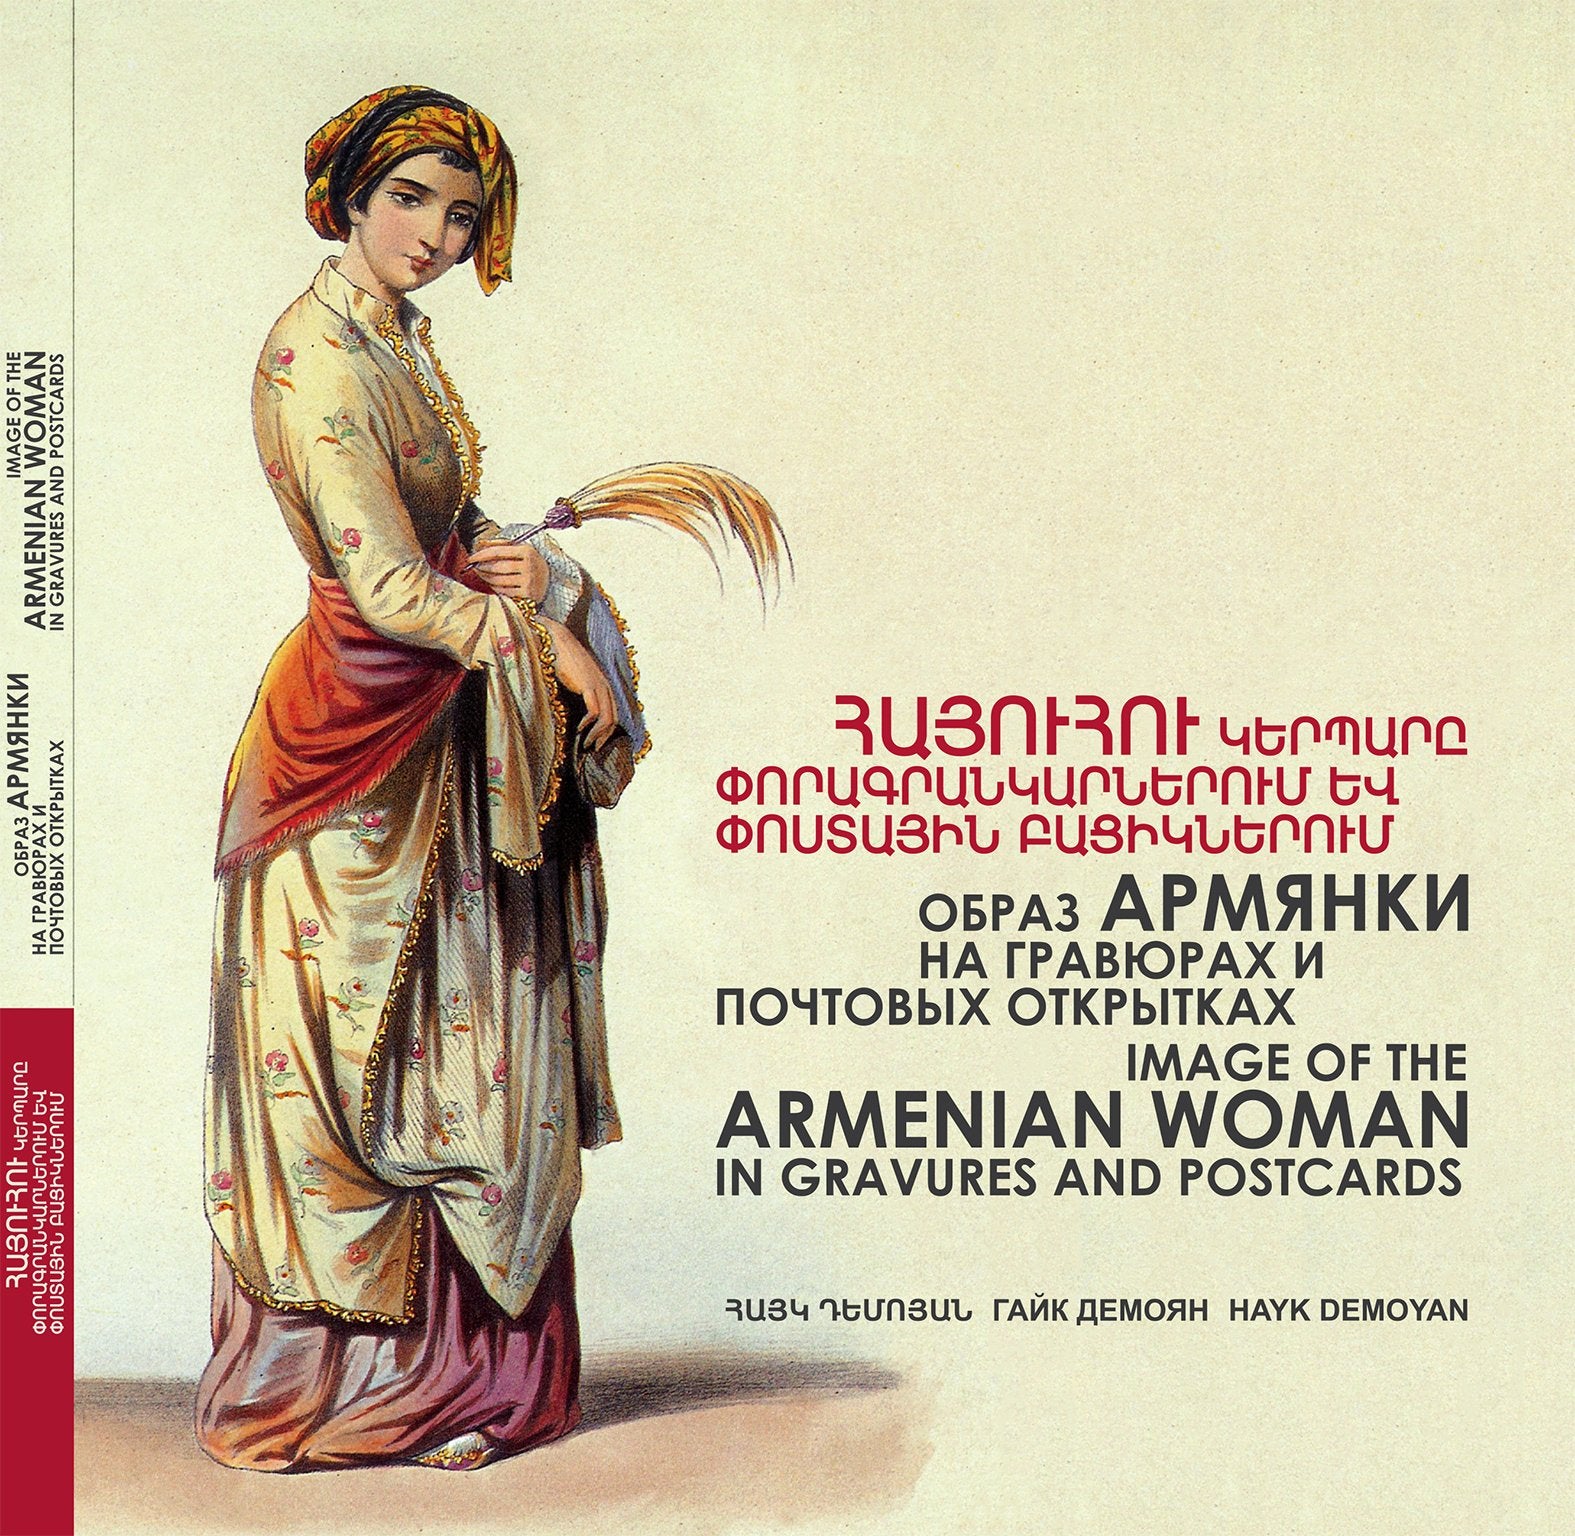 IMAGE OF THE ARMENIAN WOMAN IN GRAVURES AND POSTCARDS